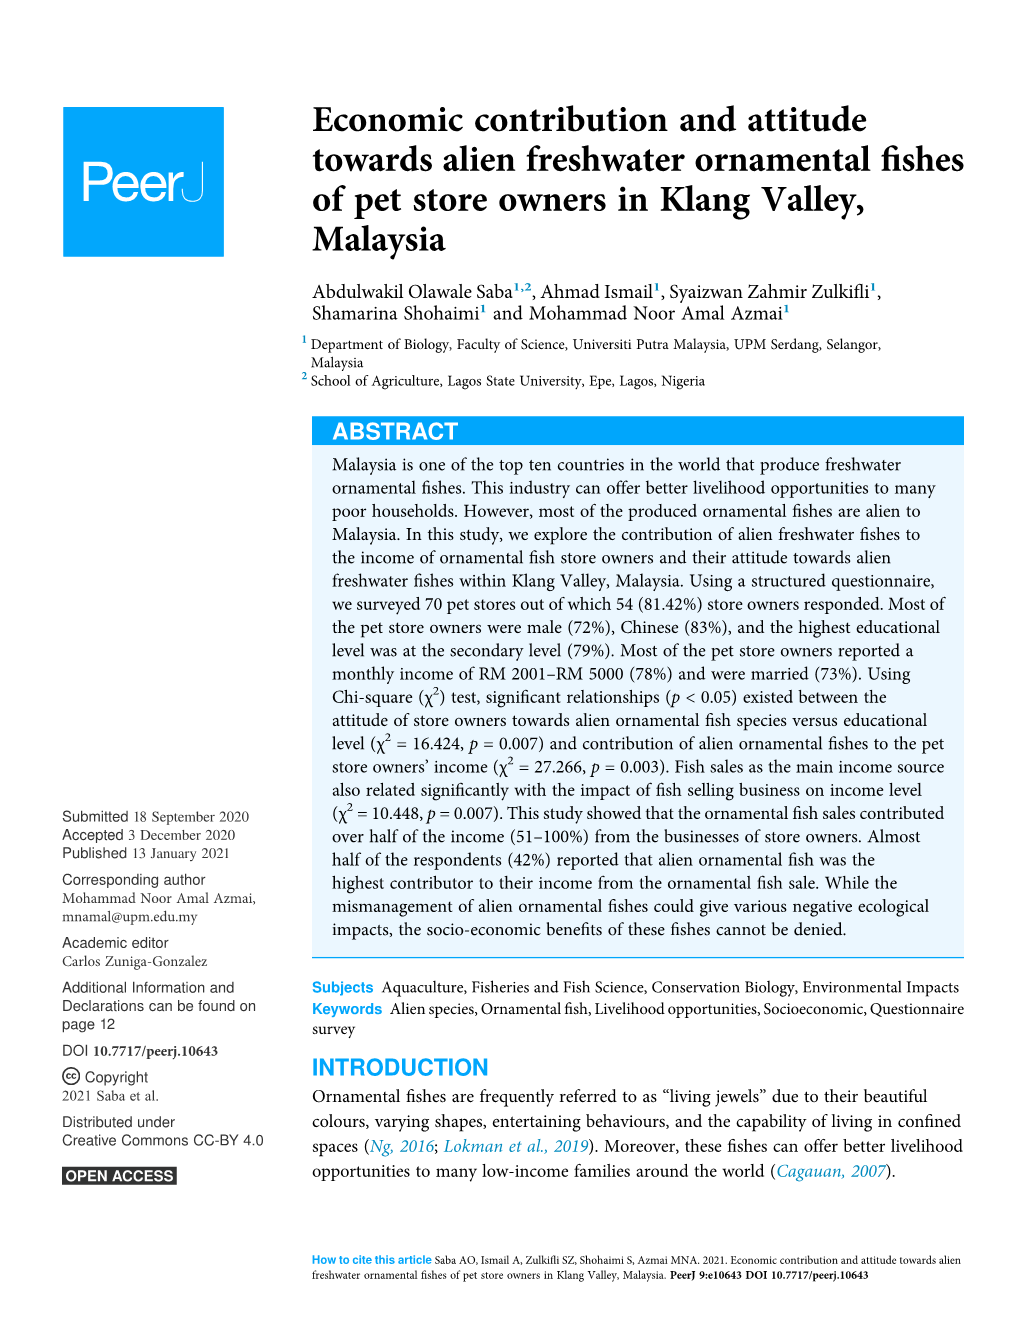 Economic Contribution and Attitude Towards Alien Freshwater Ornamental ﬁshes of Pet Store Owners in Klang Valley, Malaysia